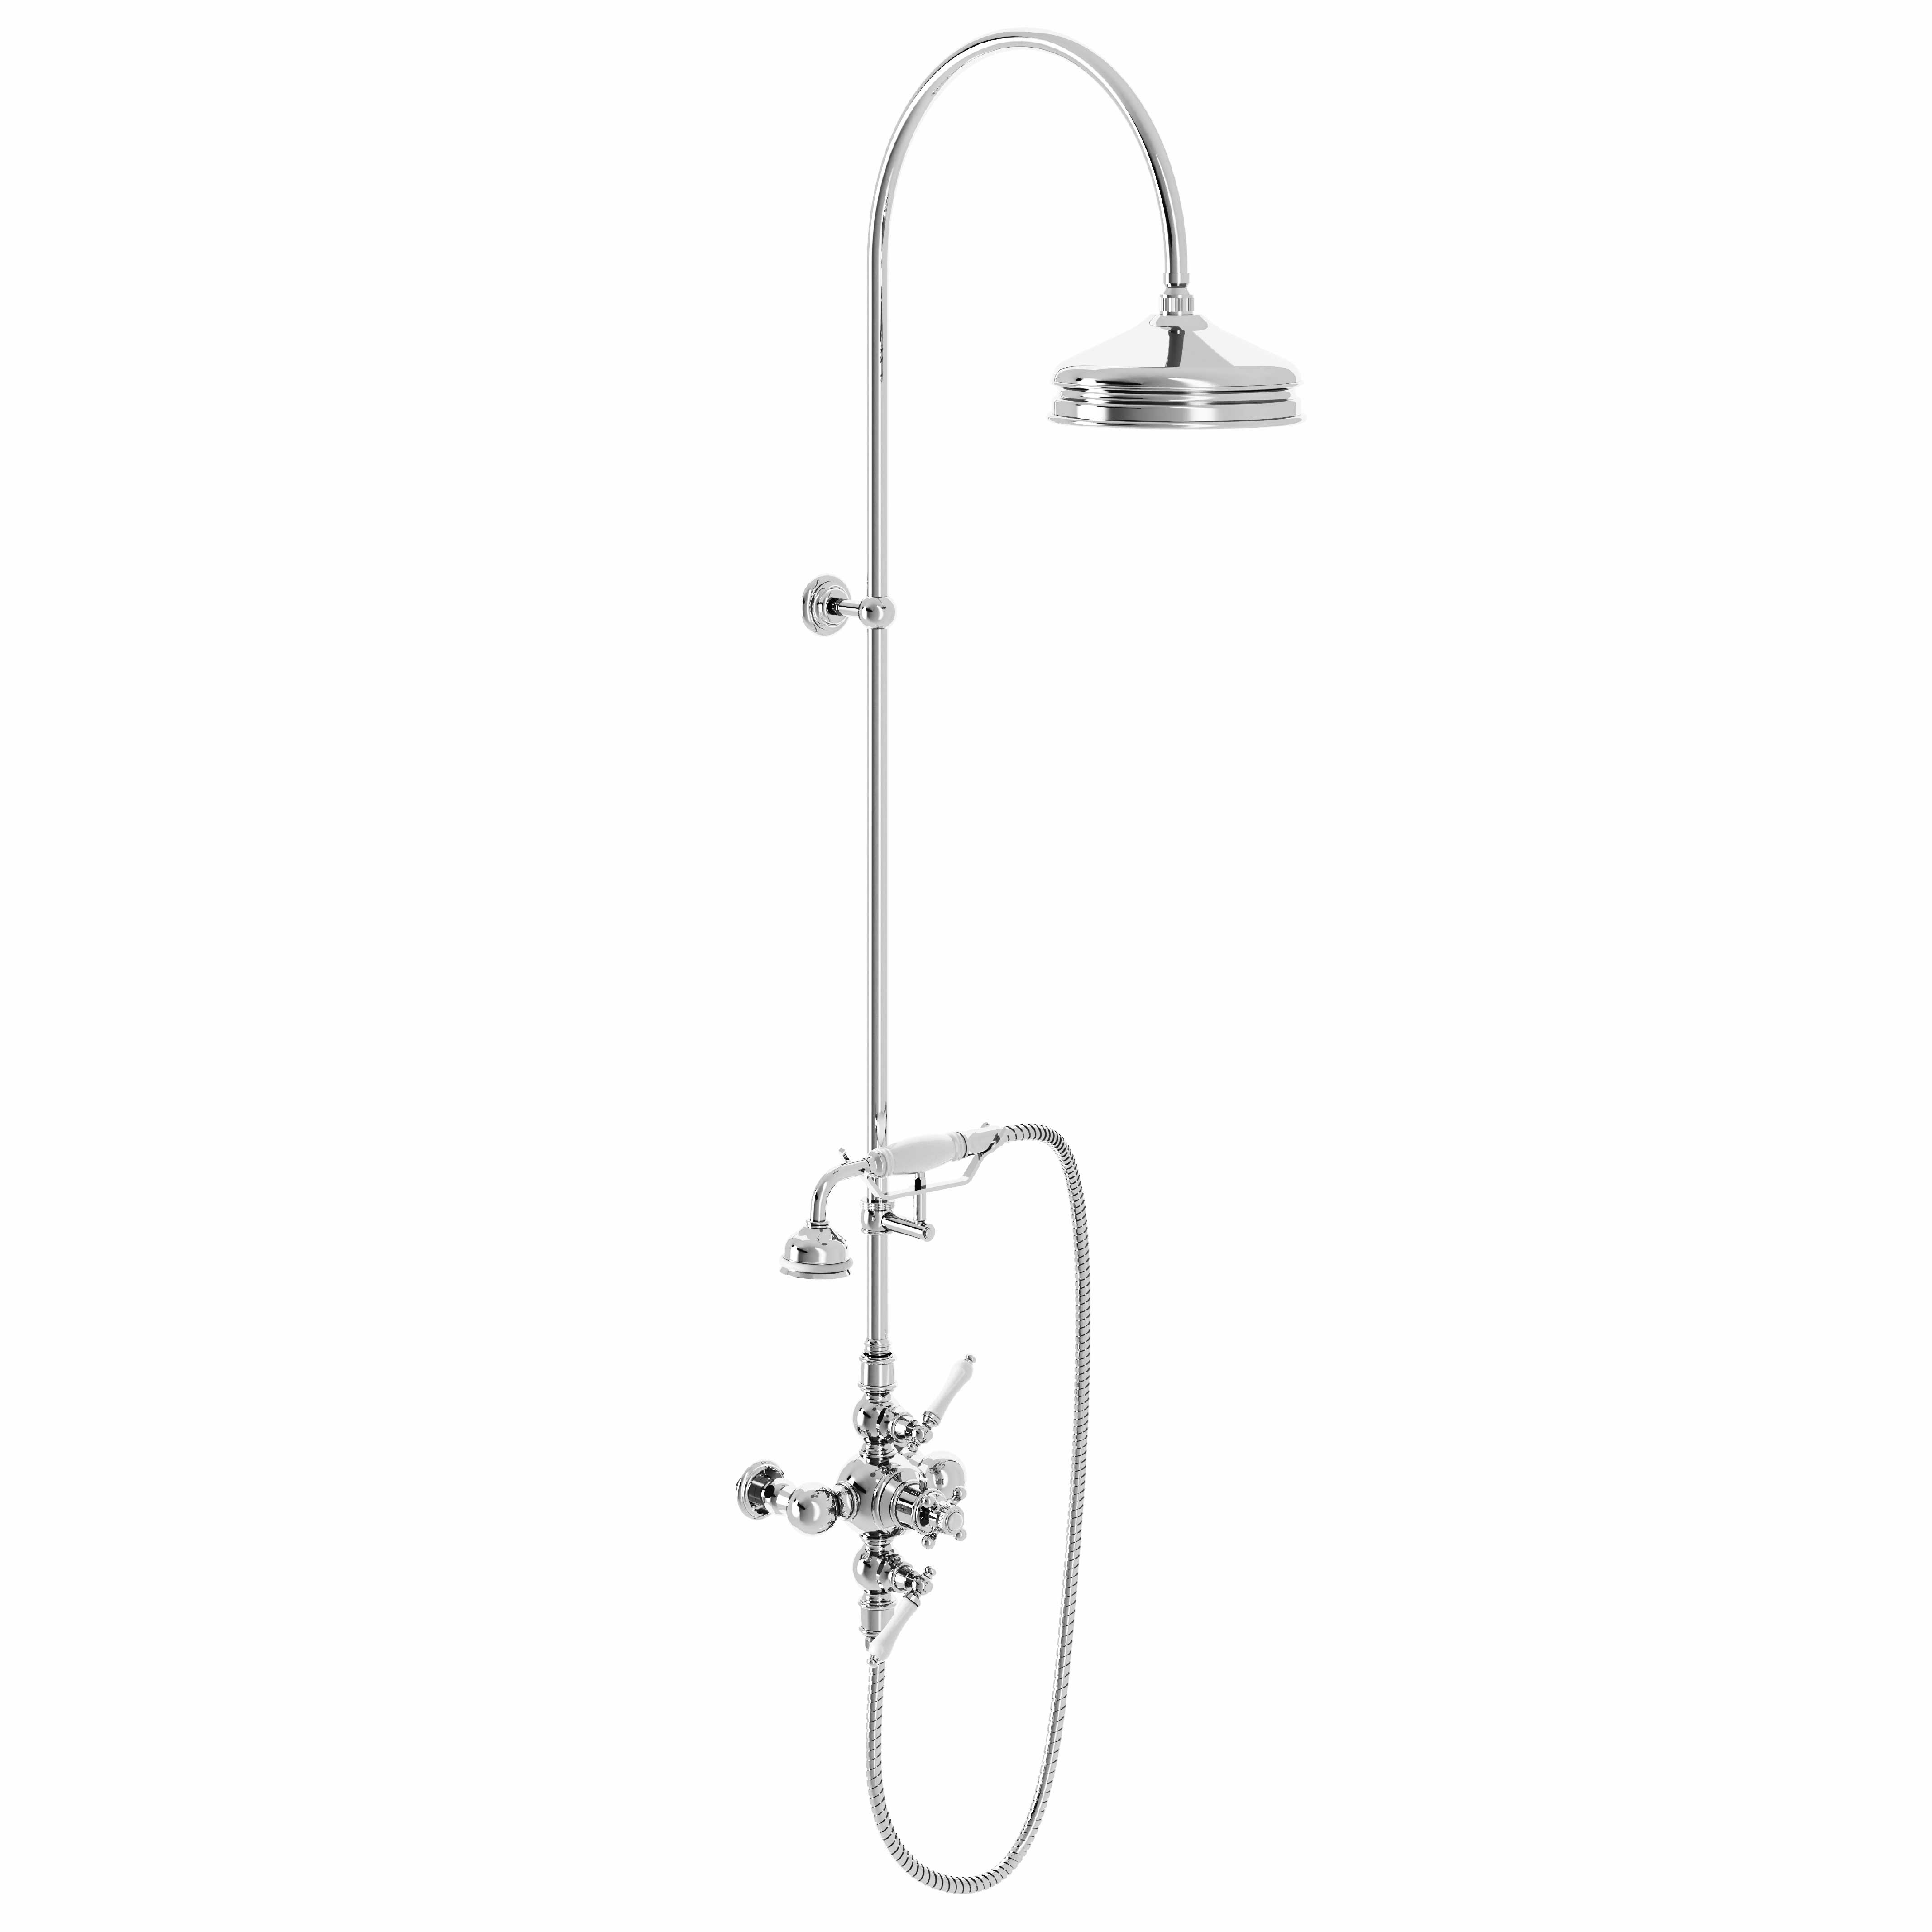 M20-2204T Thermo. shower mixer with column, anti-scaling